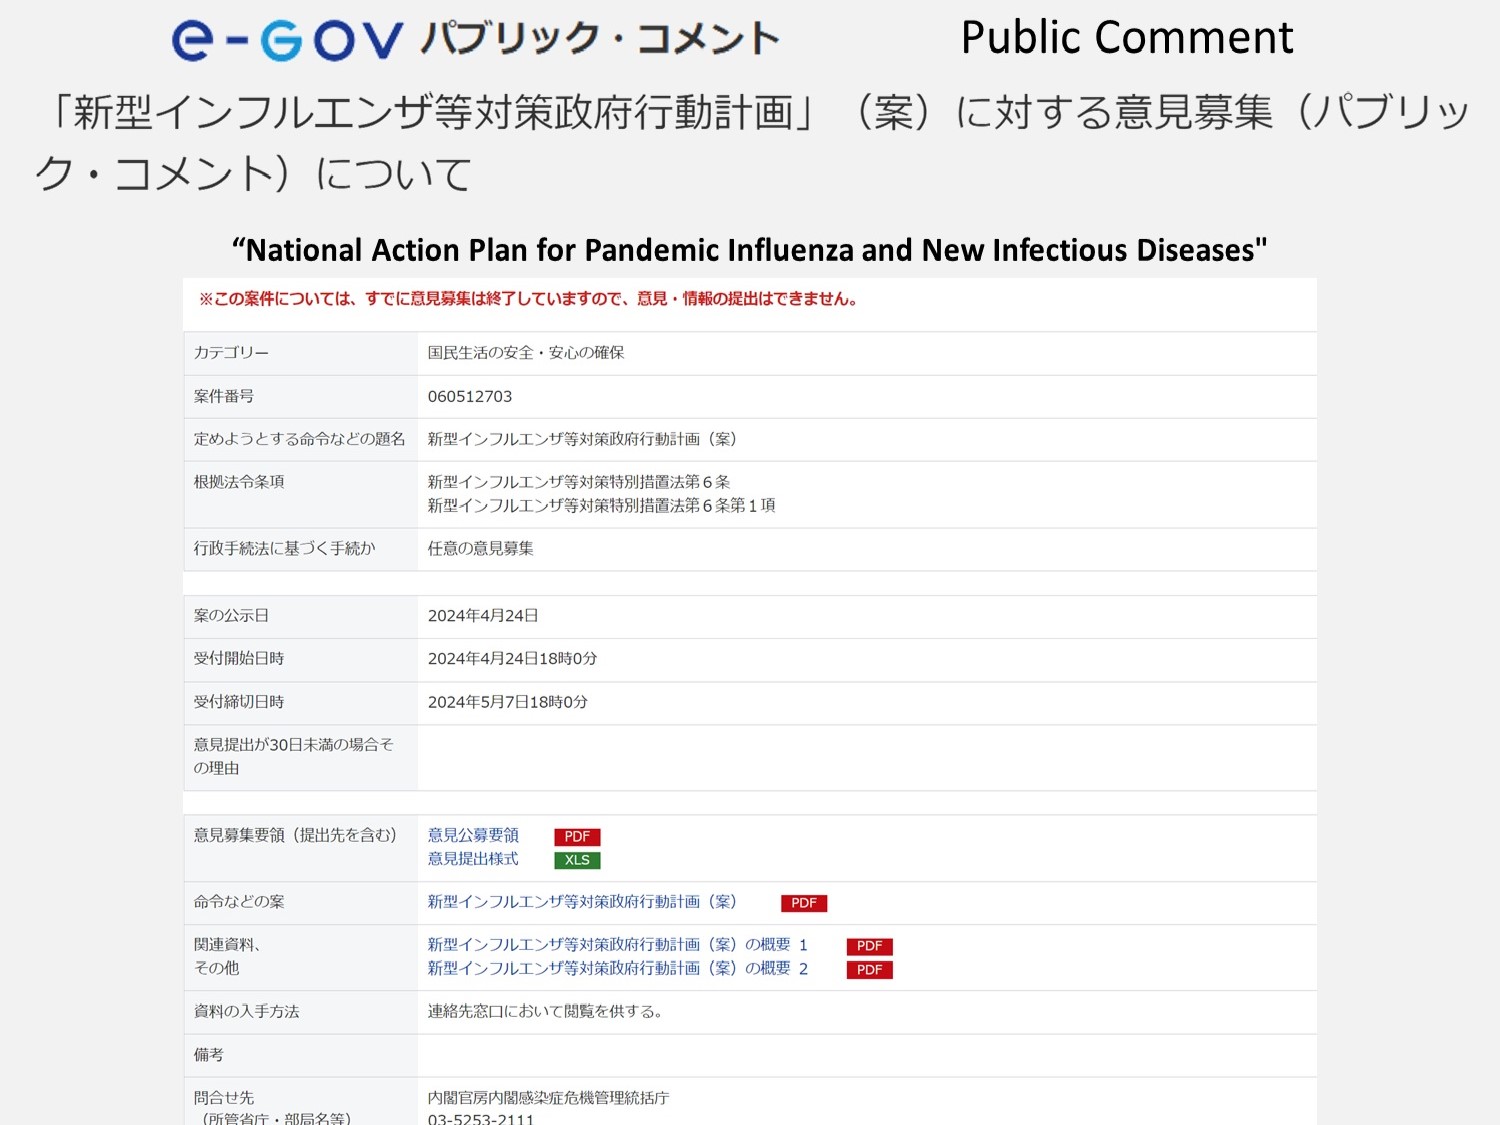 [Public Comment Submission] “National Action Plan for Pandemic Influenza and New Infectious Diseases (Draft)” (May 7, 2024)